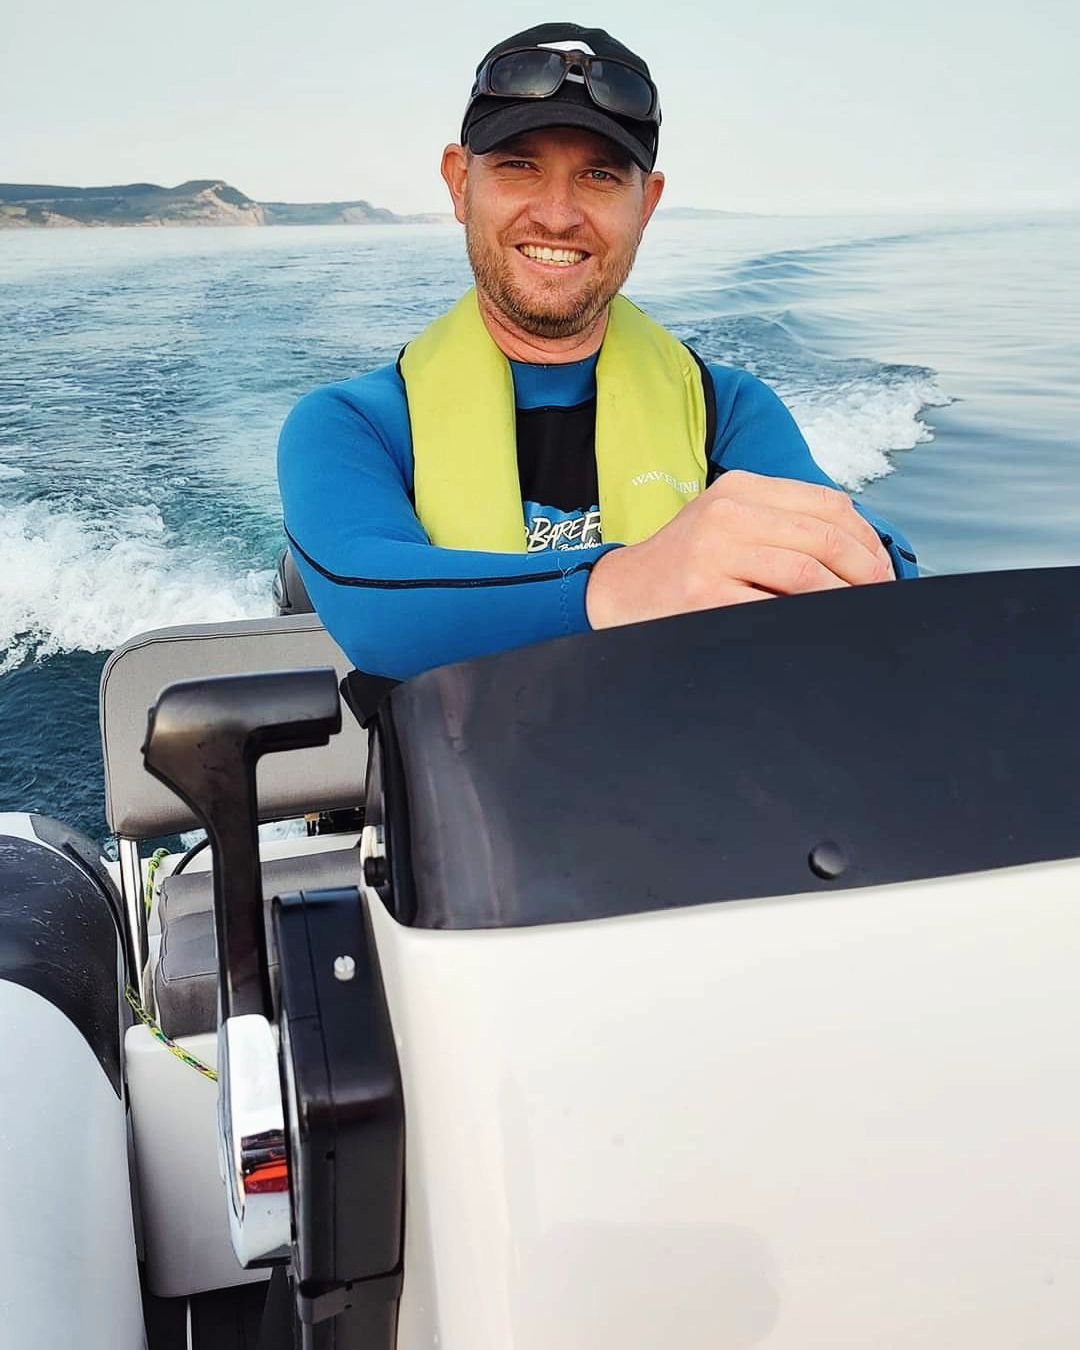 Hands up if you're heading to the water today! 👋🌊

#oceanribs #summer2024 #wellssomerset #ribs #boatsalesuk #boating #newseason #luxury #southwest #britishmade #boatbuilding #jurassiccoast